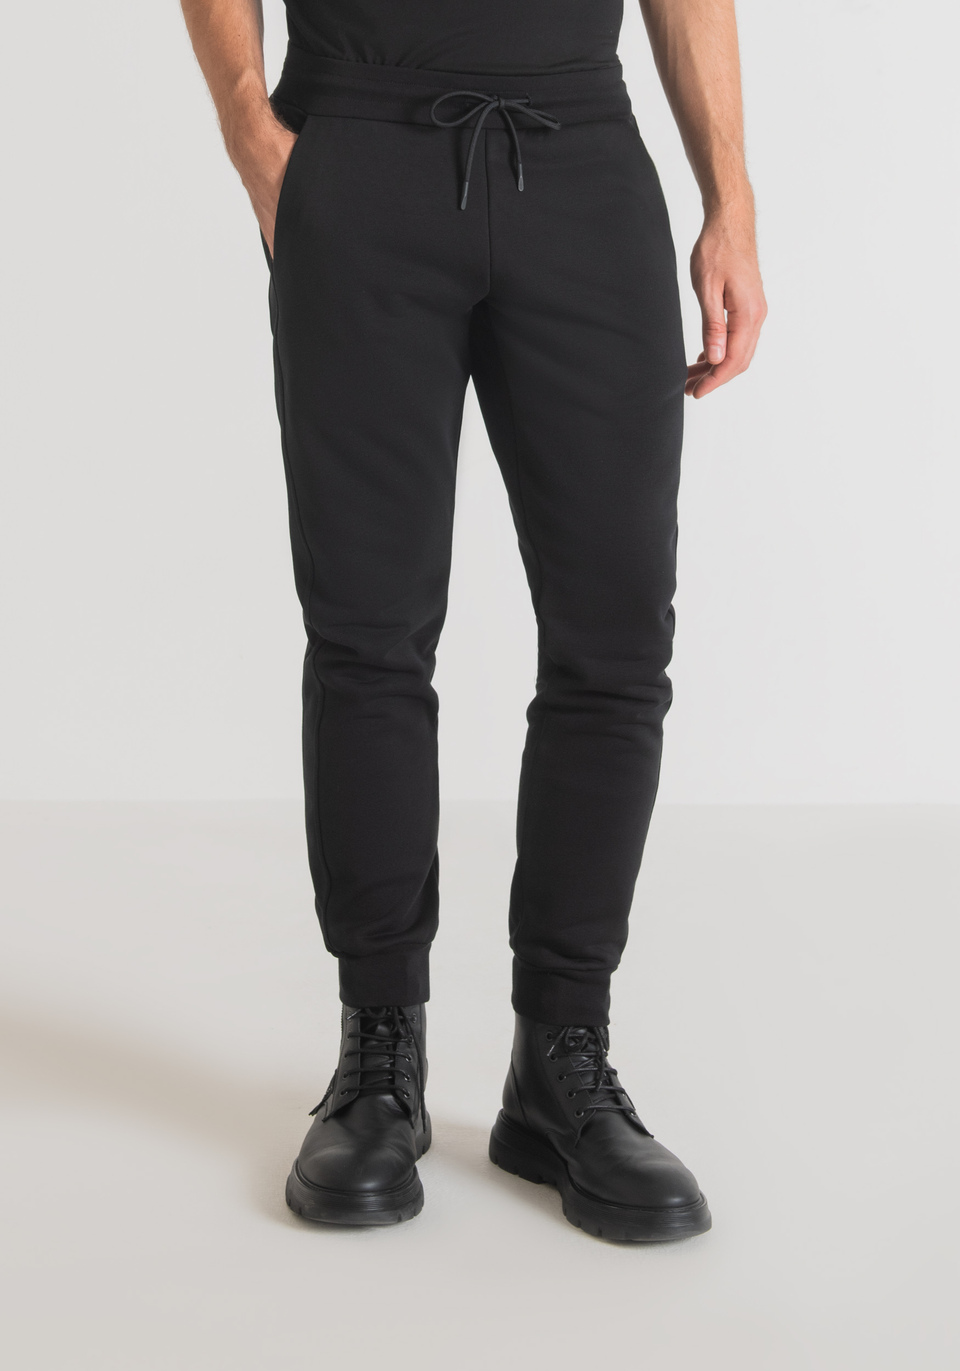 SLIM-FIT SWEATPANTS WITH SIDE BAND - Antony Morato Online Shop